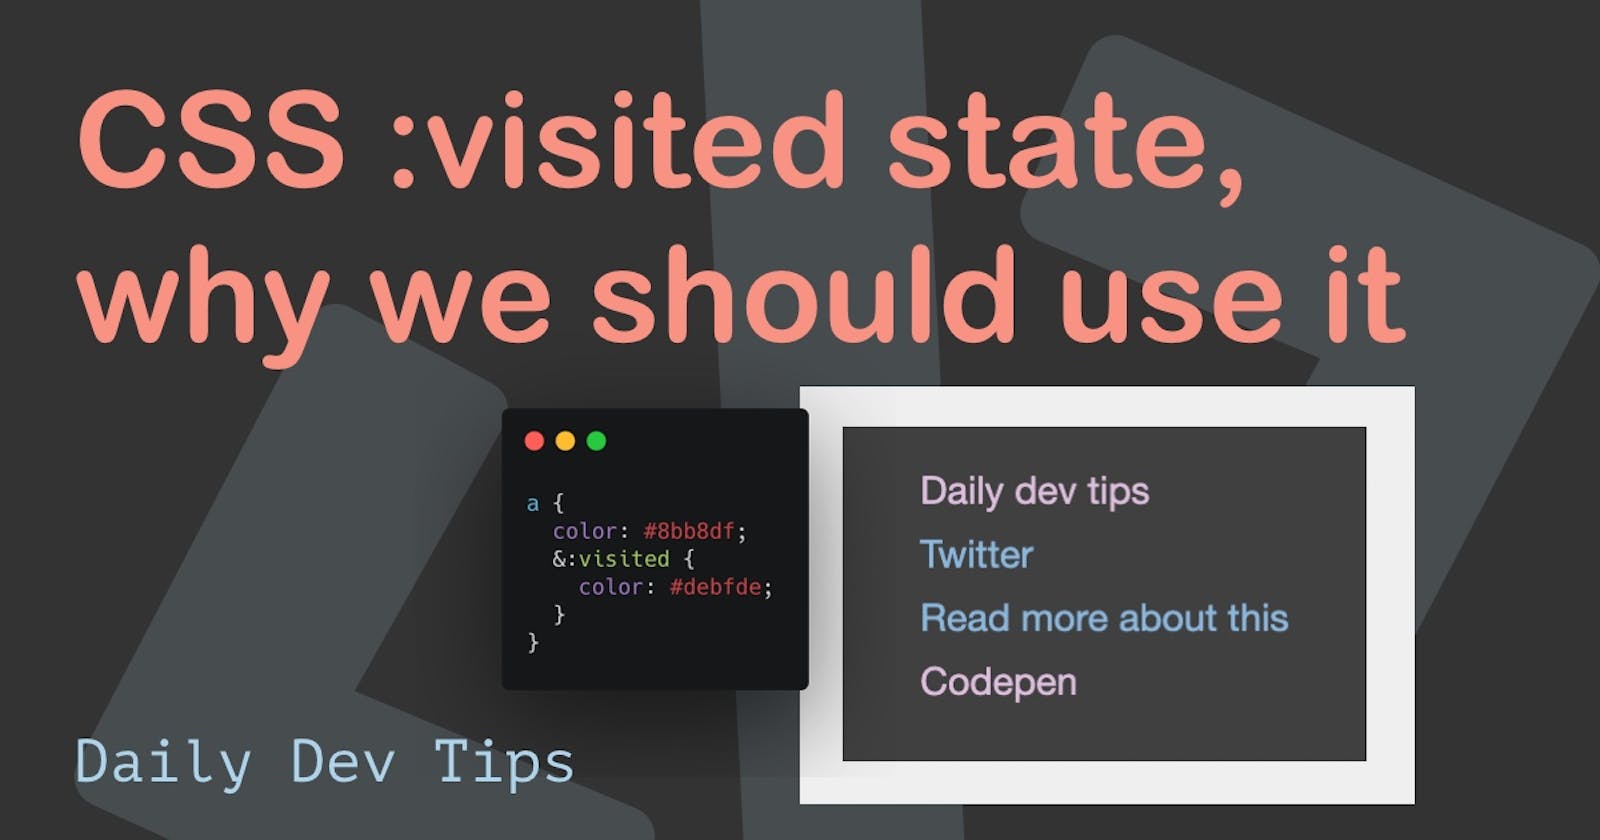 CSS :visited state, why we should use it